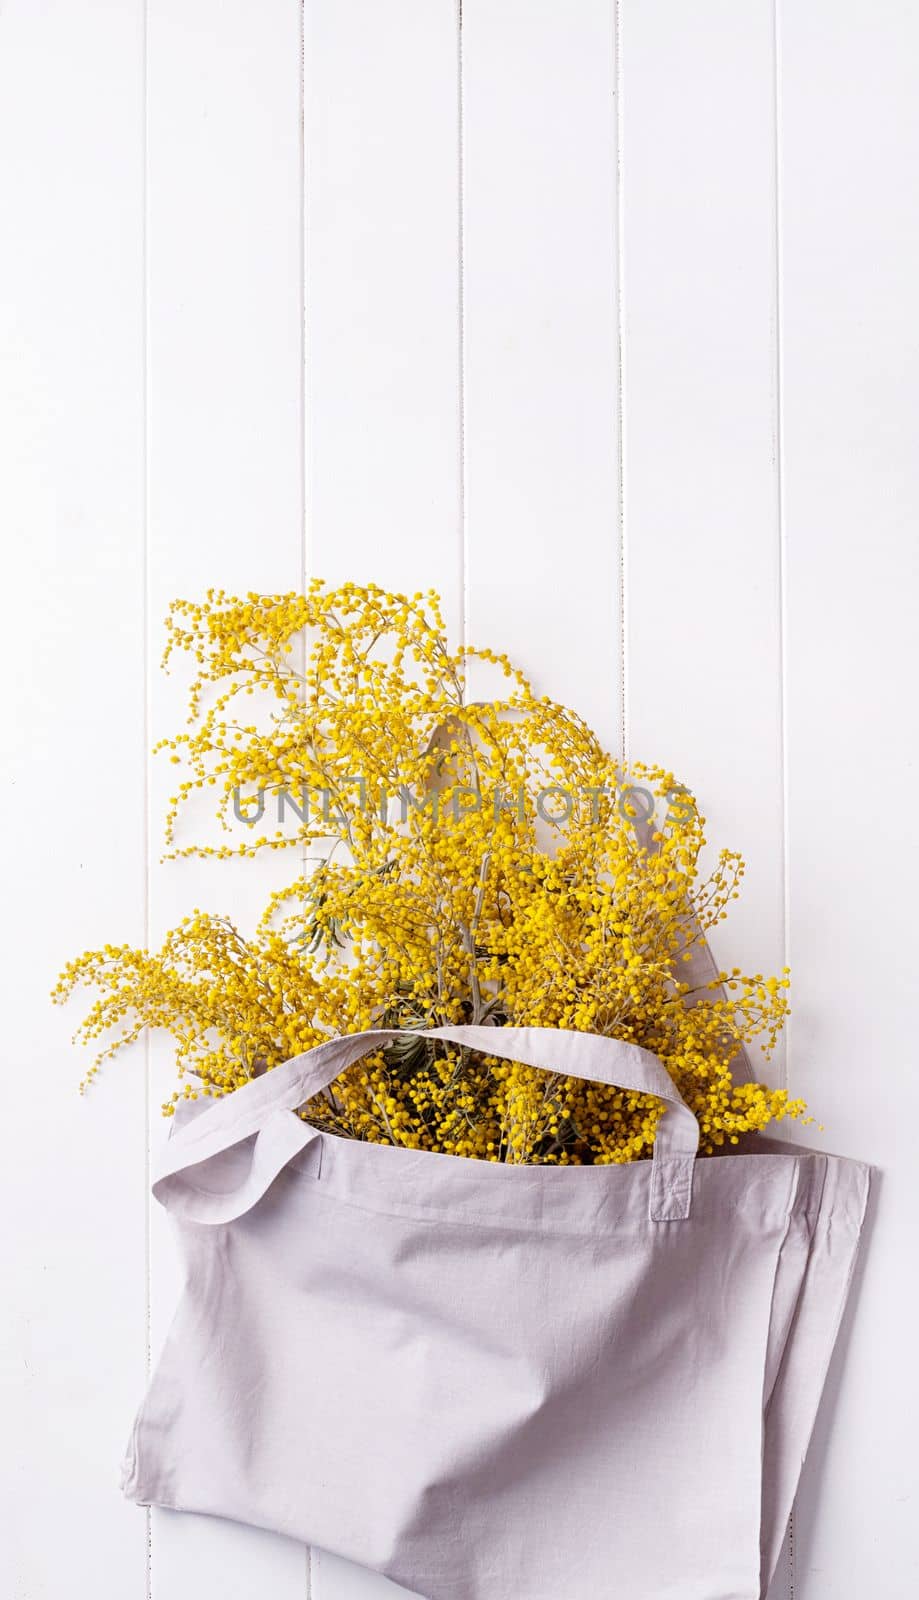 yellow mimosa flowers bouquet in shopping bag on wooden bakground by Desperada